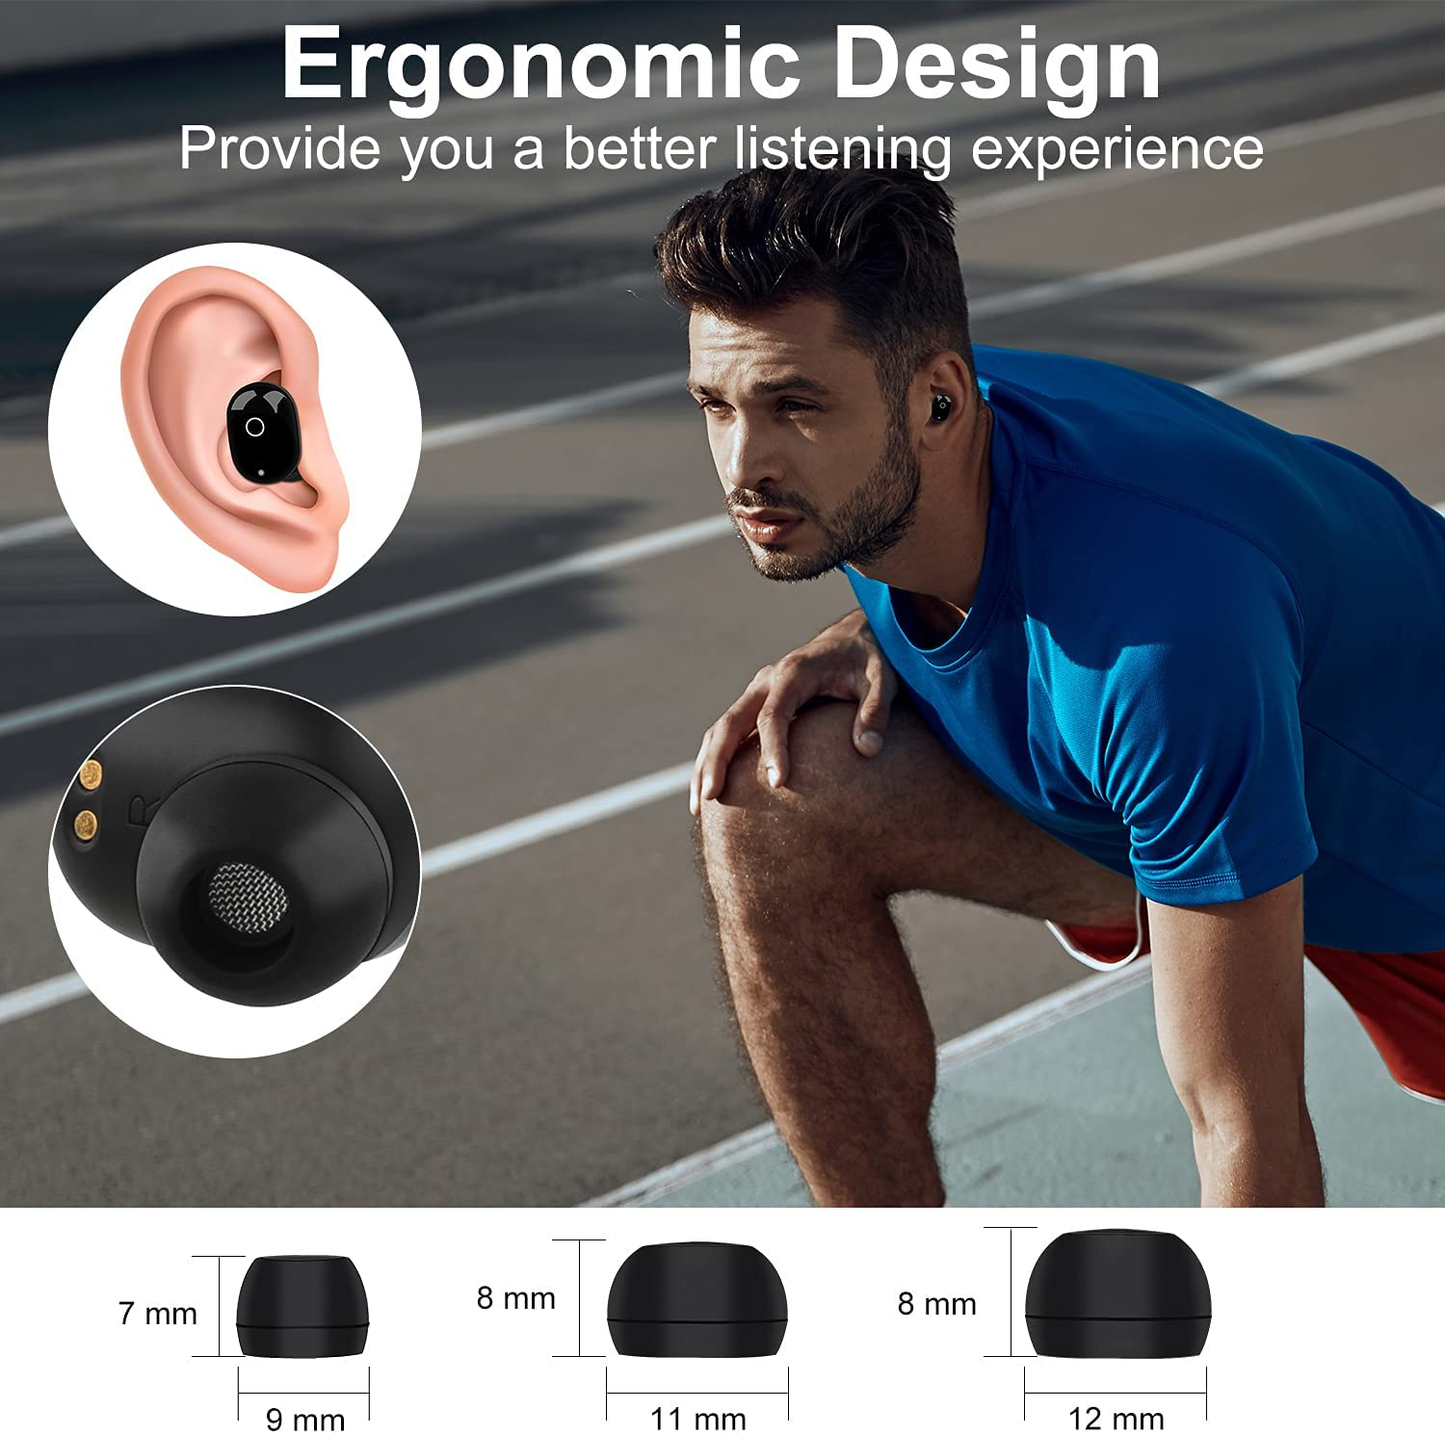 Wireless Earbuds Bluetooth In-Ear Headphones: Hifi Stereo Sound with USB C Charging Case, Touch Control, Earphones with Microphone for Sports Gaming Workout Sleeping Working, Black